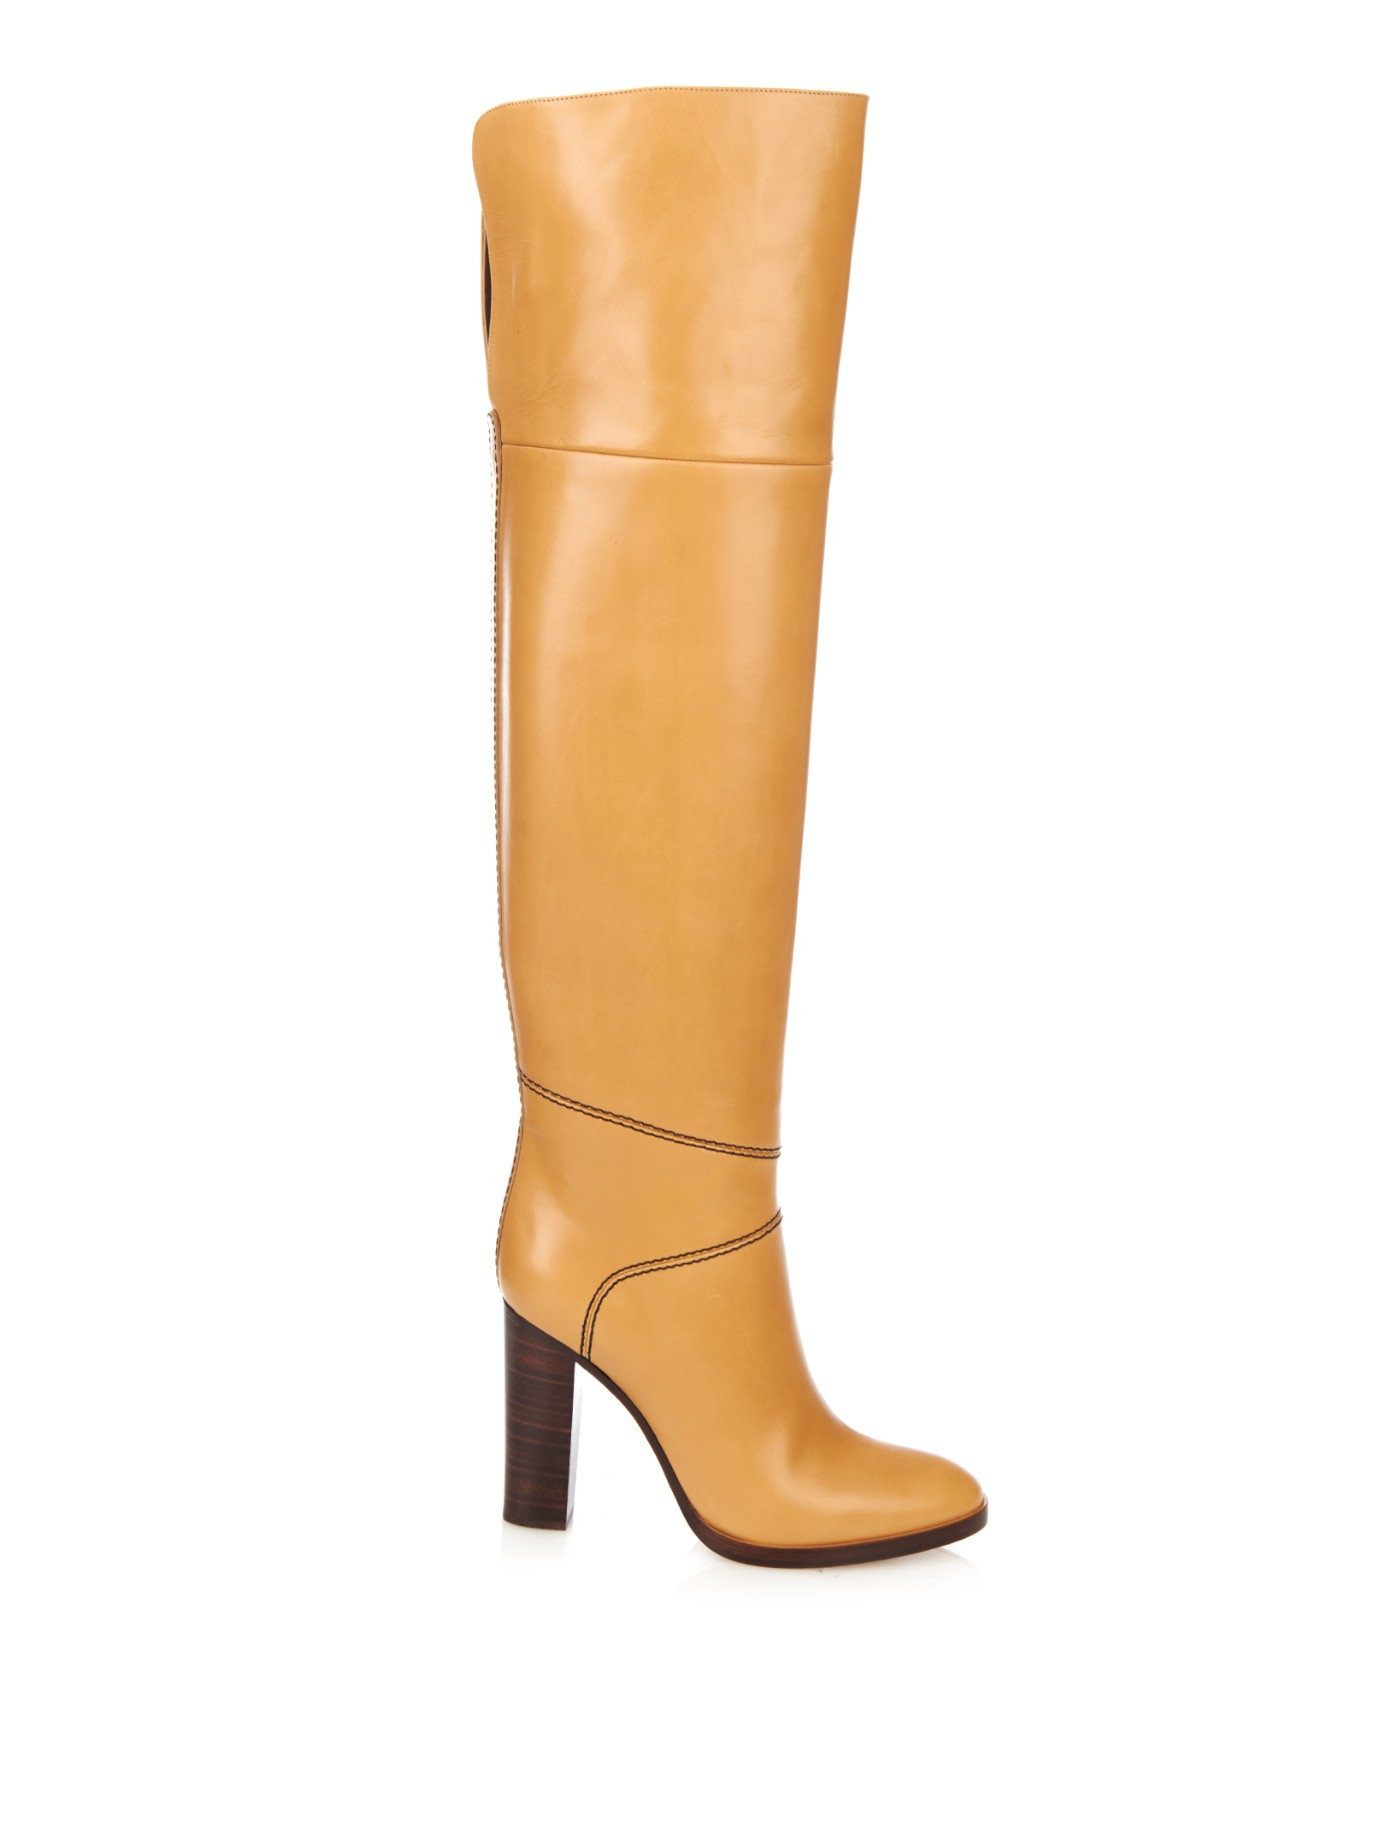 Lyst - Chloé Graze Over-The-Knee Leather Boots in Brown